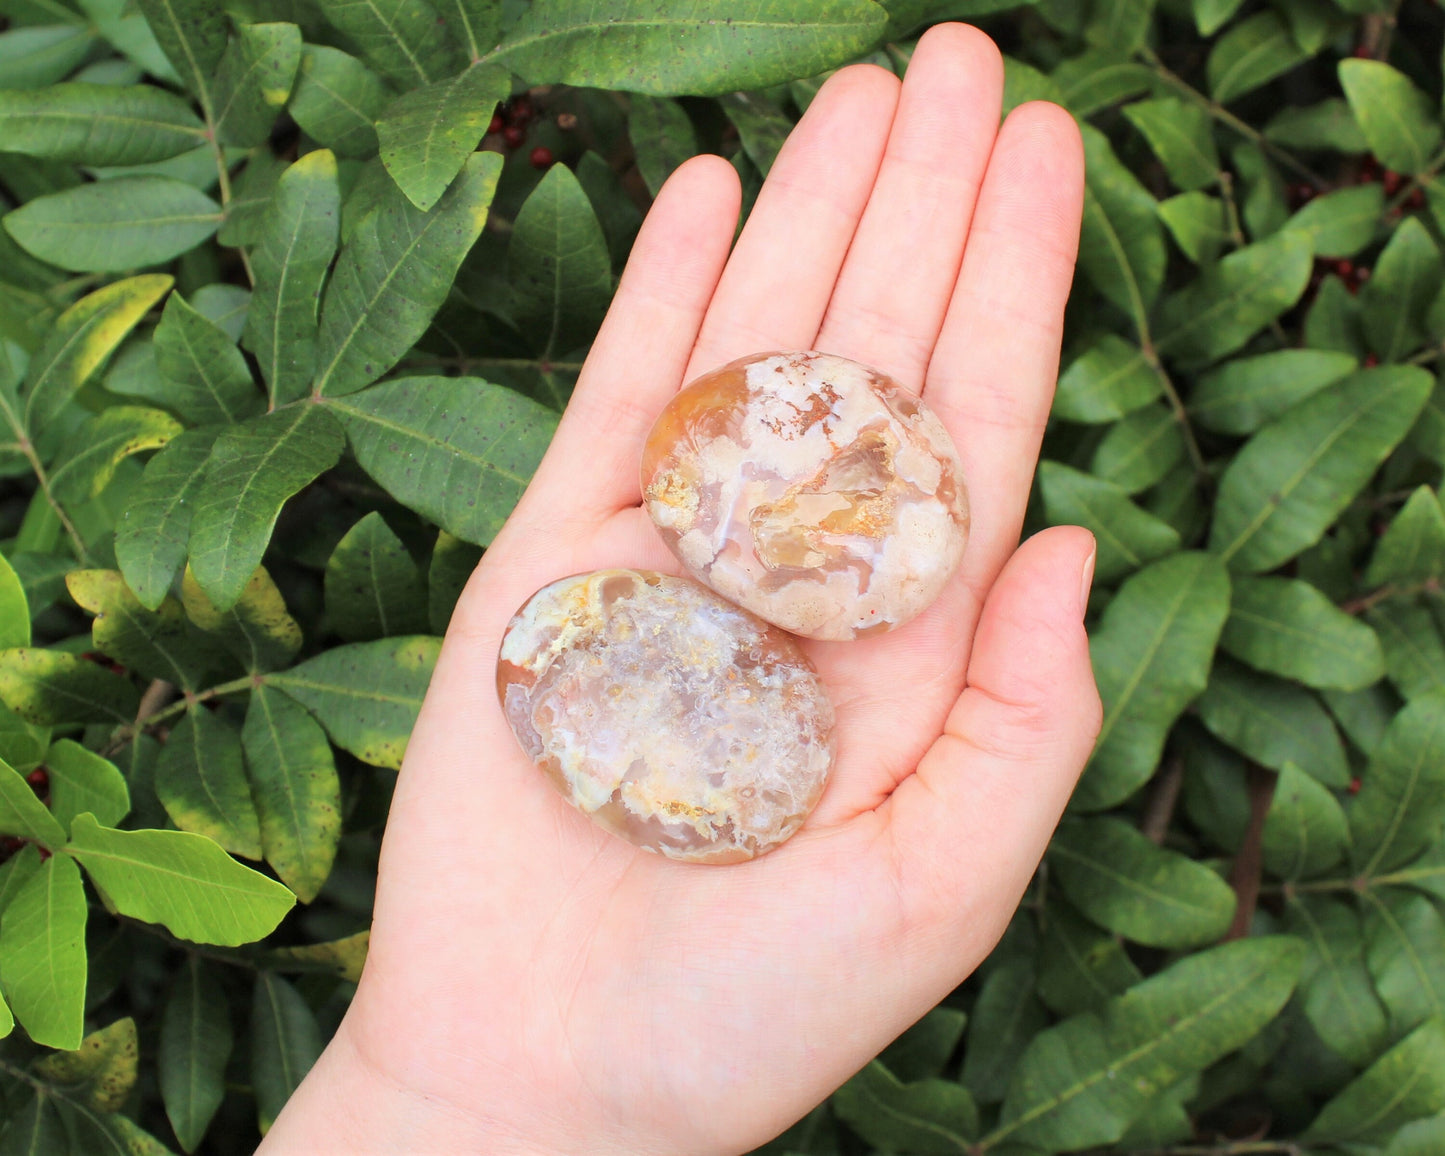 Flower Agate Polished Stones